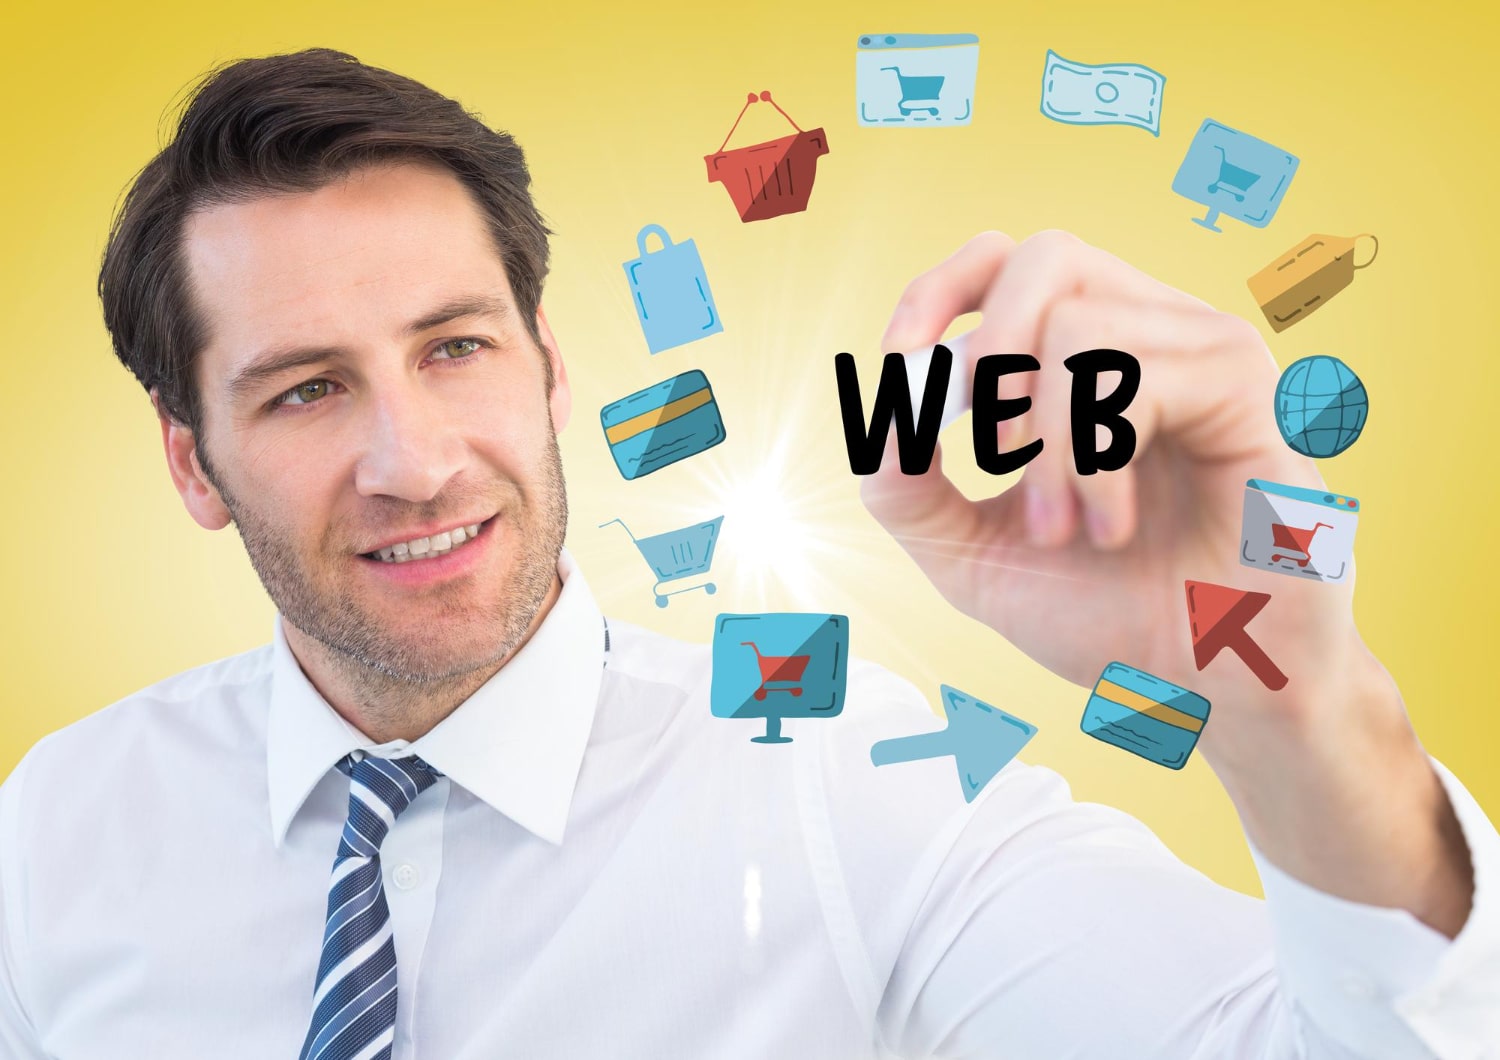 For small businesses, having a website is even more crucial